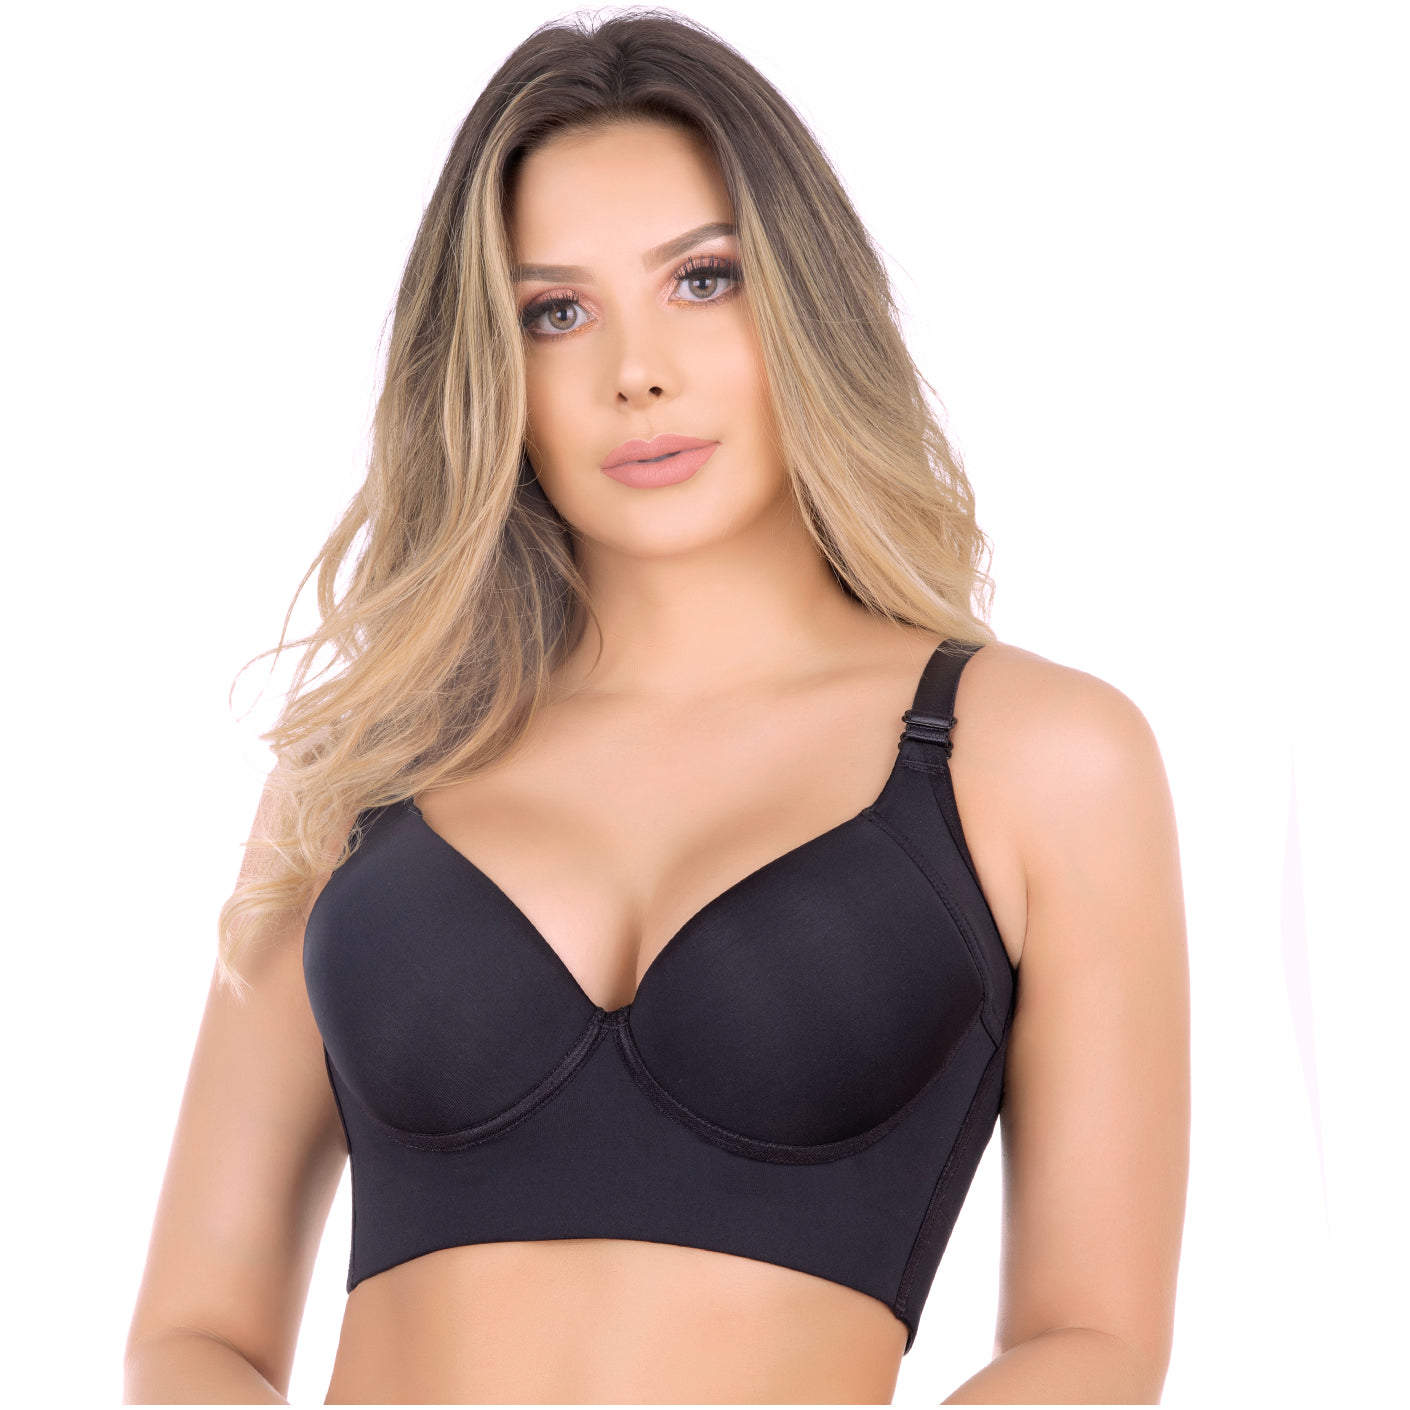 UpLady 8532 | Extra Firm High Compression Full Cup Push Up Brassier - 32B /  Black